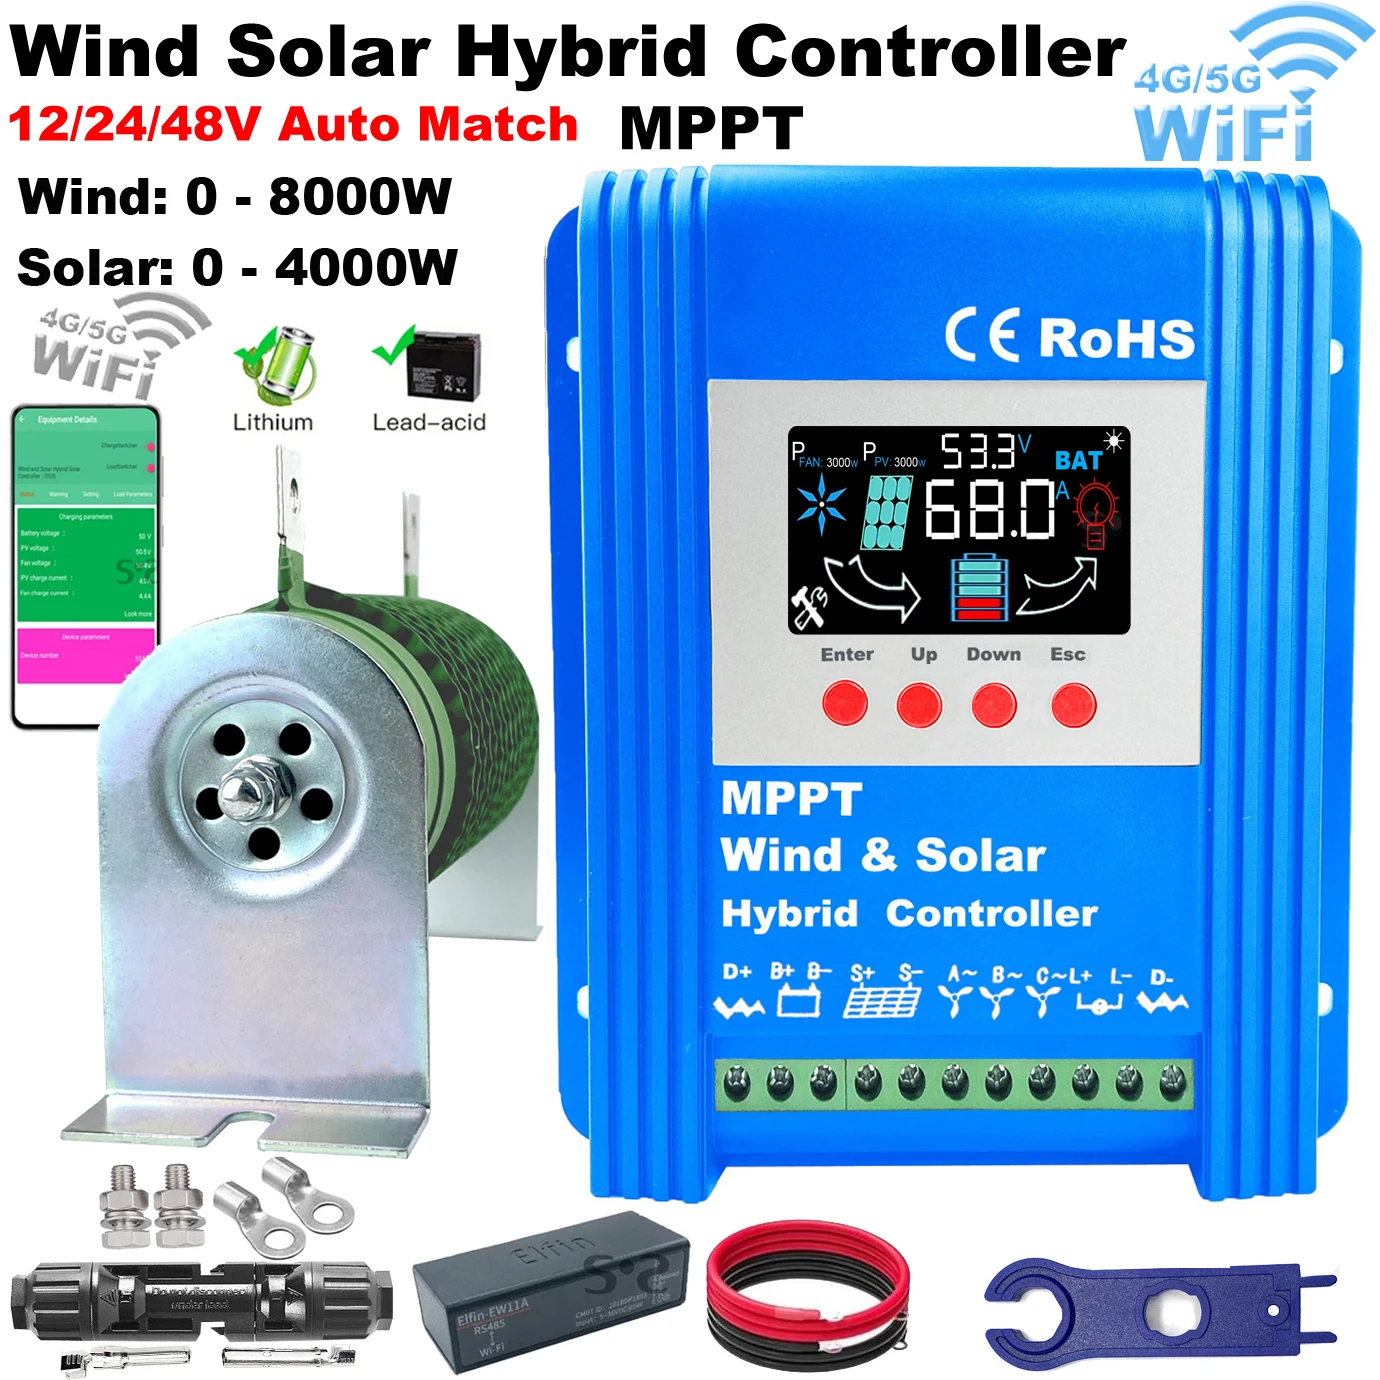 

New 5000W MPPT Hybrid Wind Solar Booster Charge Controller With WIFI Function For 12V 24V 48V Lifepo4 Lithium Lead Acid Battery